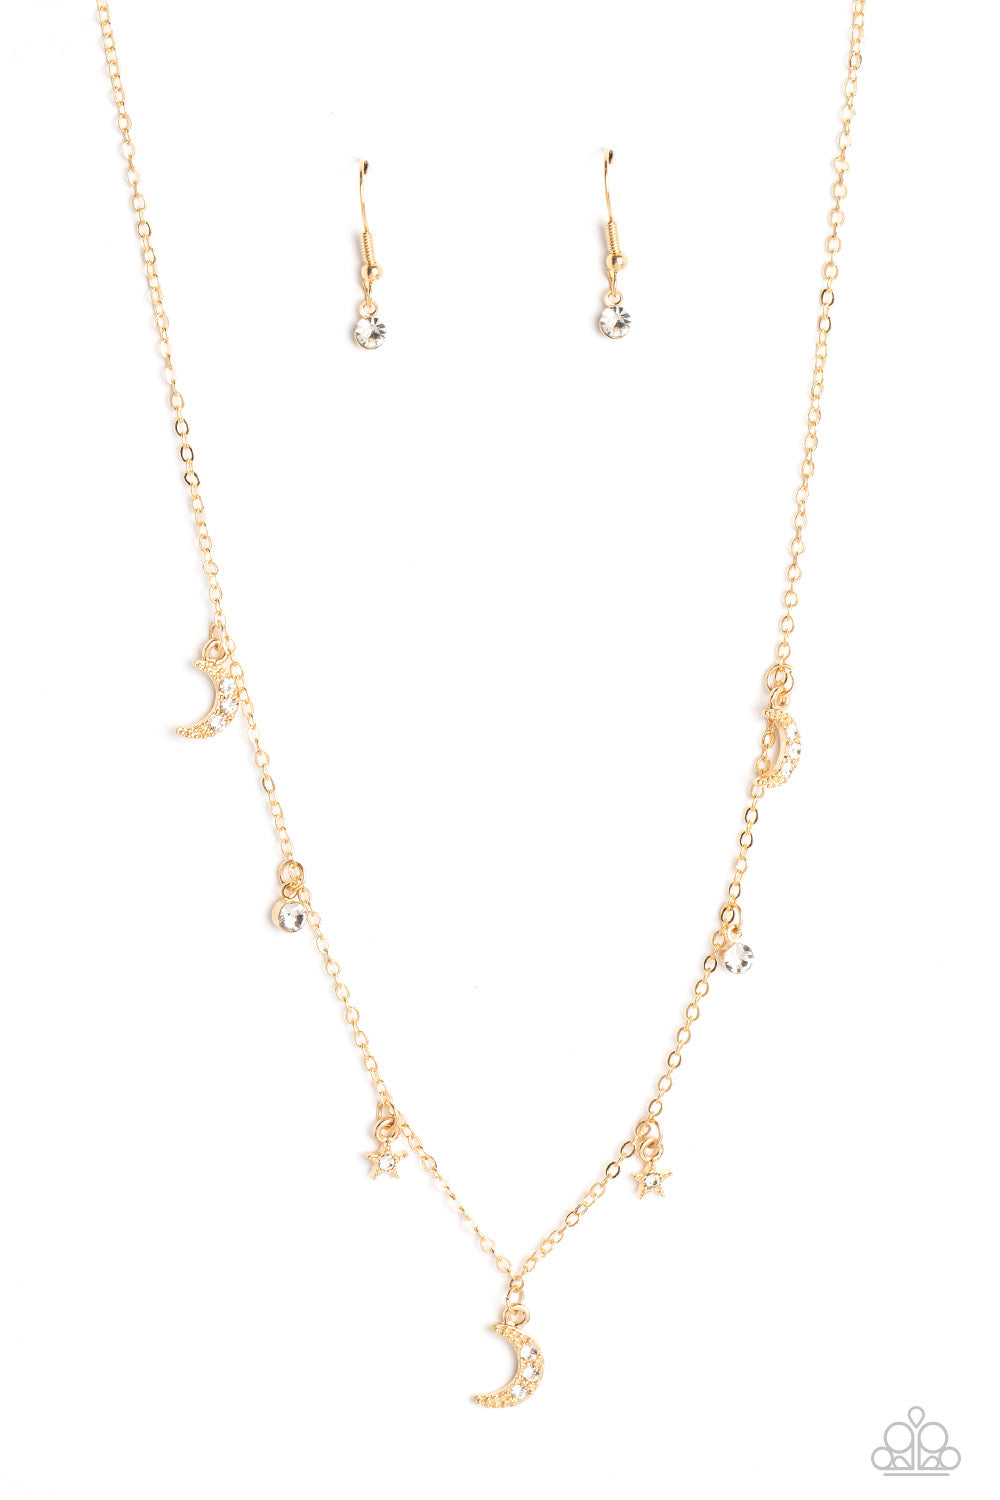 Paparazzi Lunar Lagoon - Gold Necklace - A Finishing Touch Jewelry